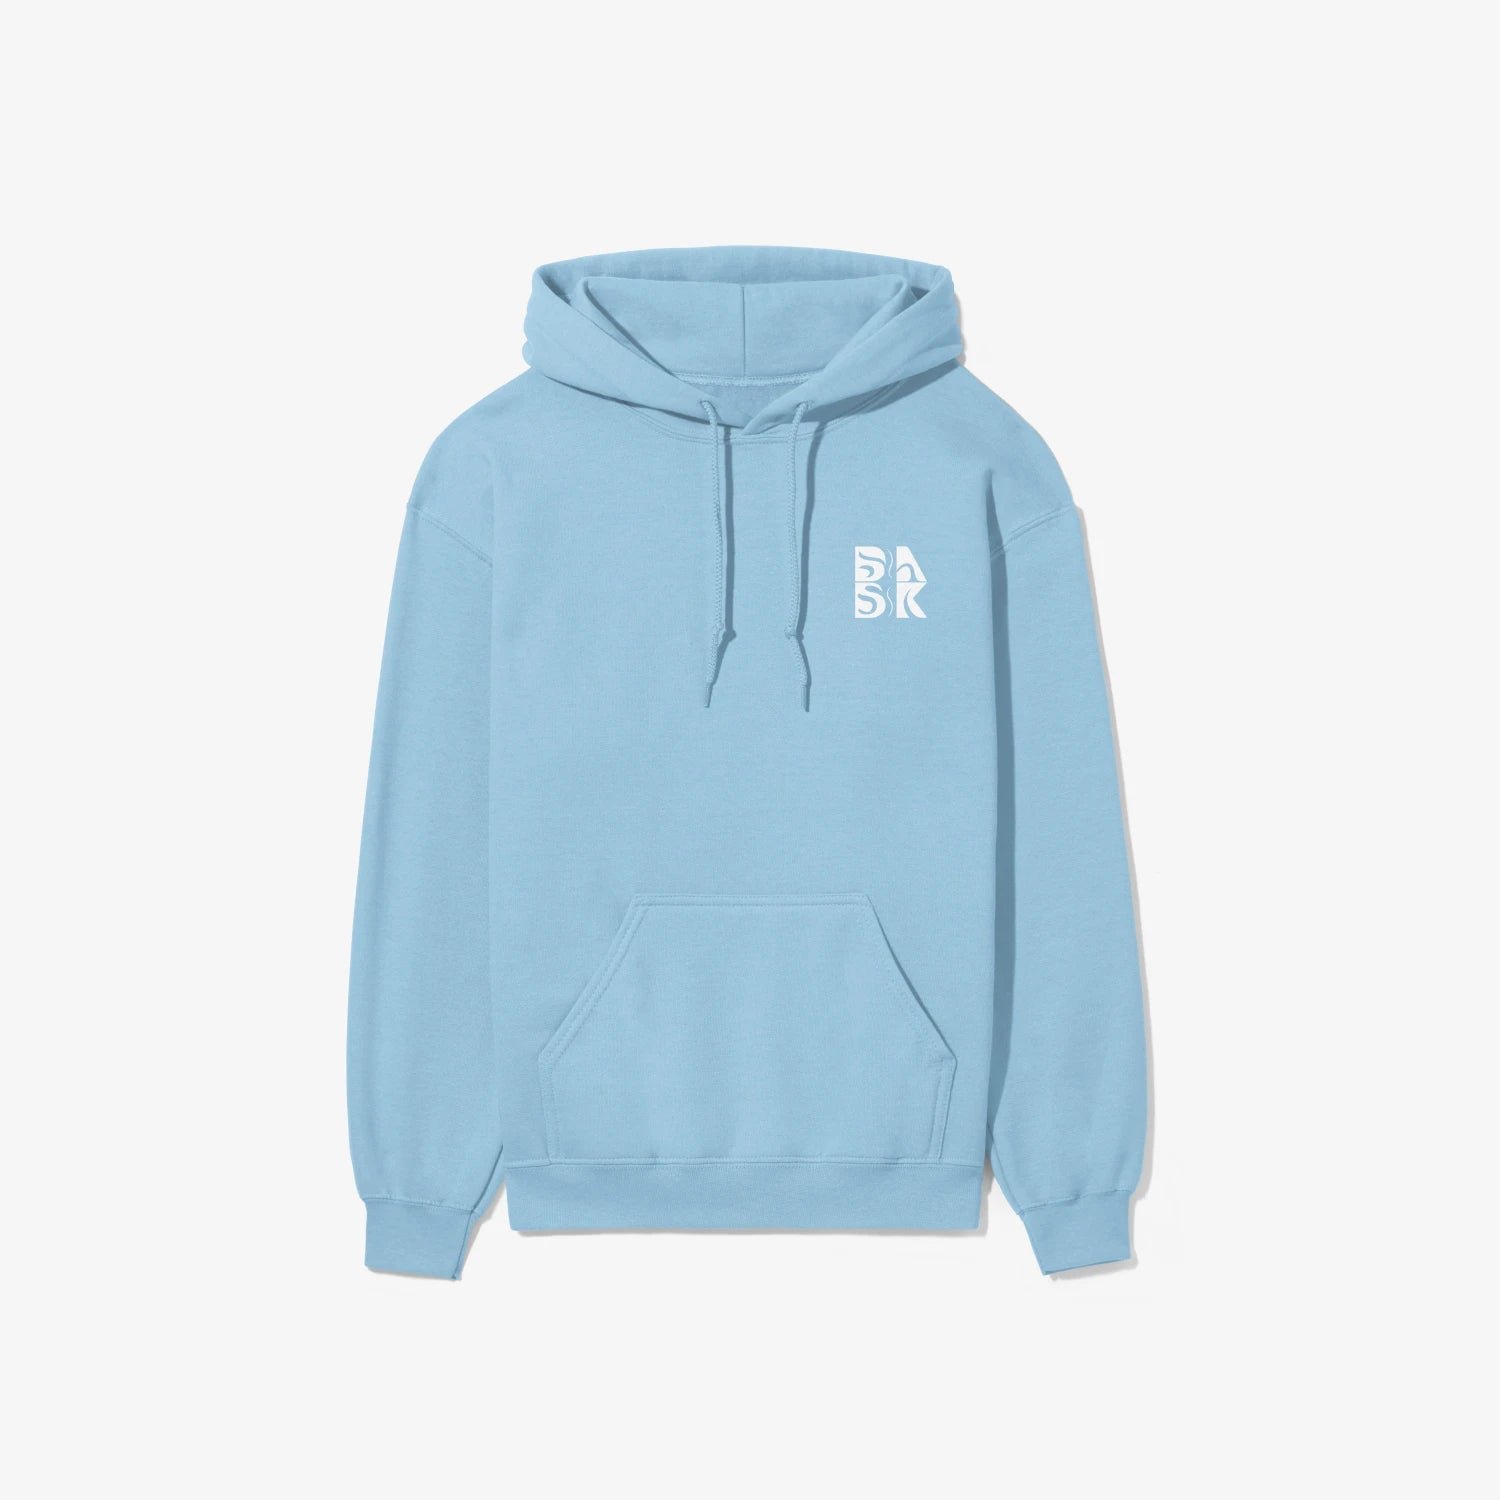 A Water Walking Faith Hoodie by Be Still and Know, light blue with the letter r on it, perfect for Christian Apparel.